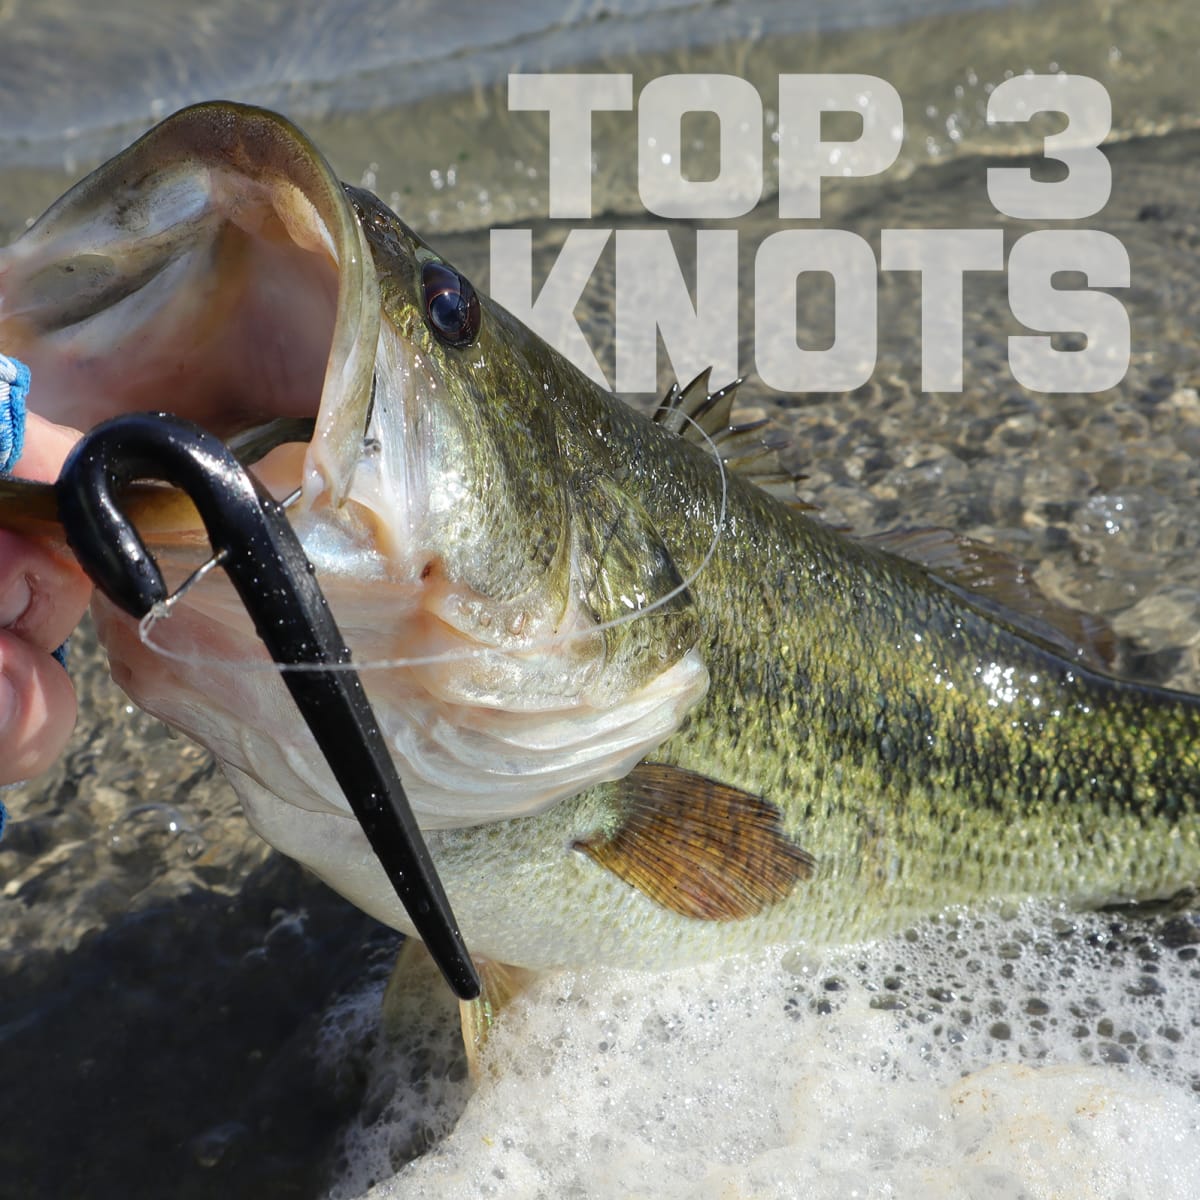 The Three Best Knots For Bass Fishing - Men's Journal